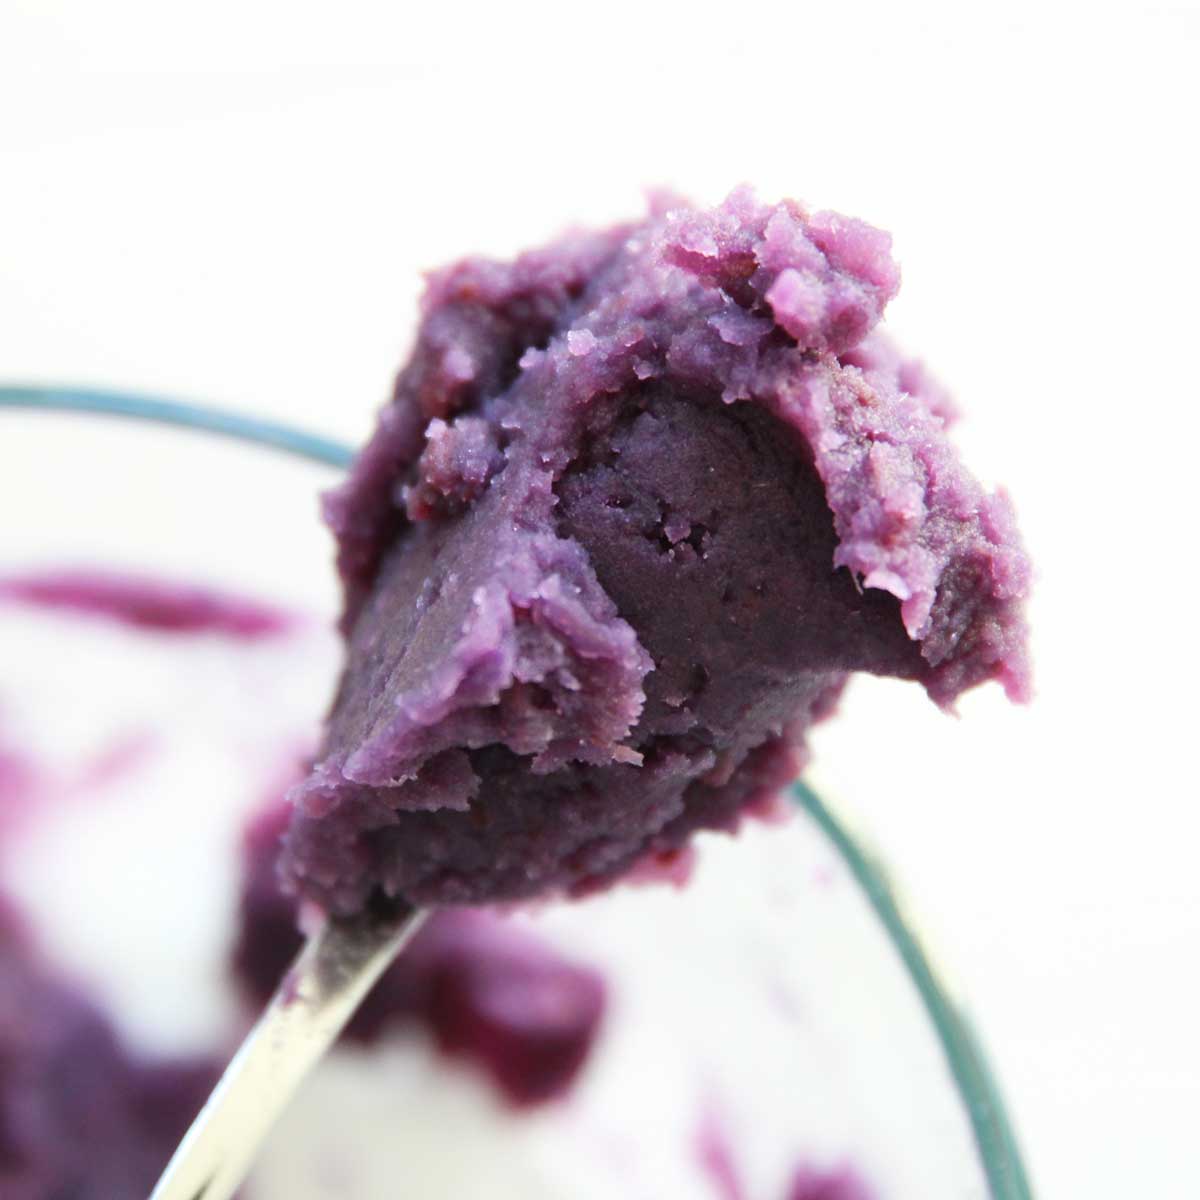 Purple Sweet Potato Filling Recipe for Mochi, Mooncakes and Steamed Buns - Pecan Pie Bars